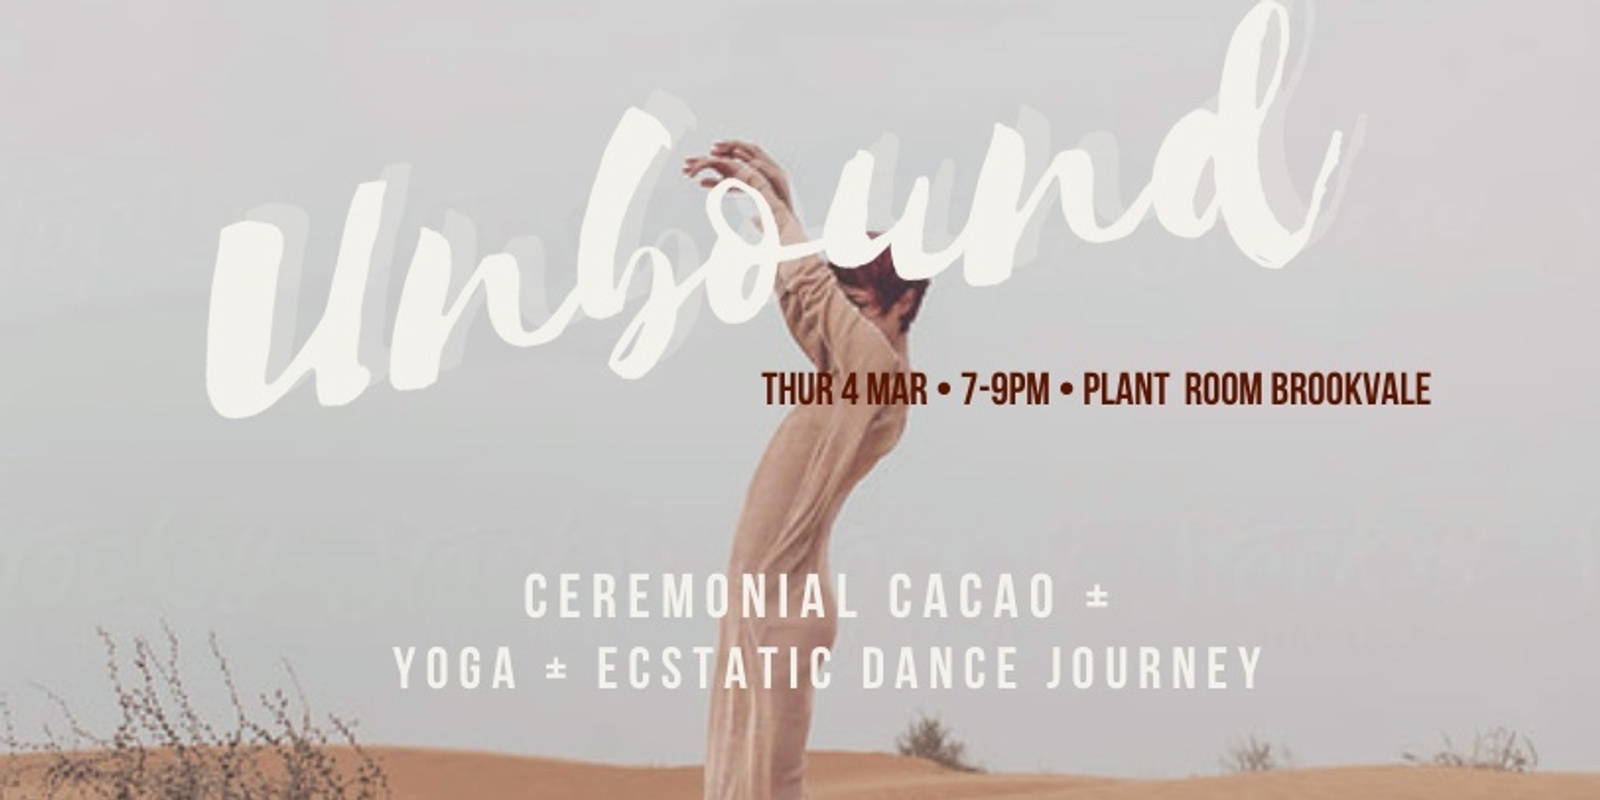 Banner image for Unbound - A Ceremonial Cacao + Yoga + Ecstatic Dance Journey